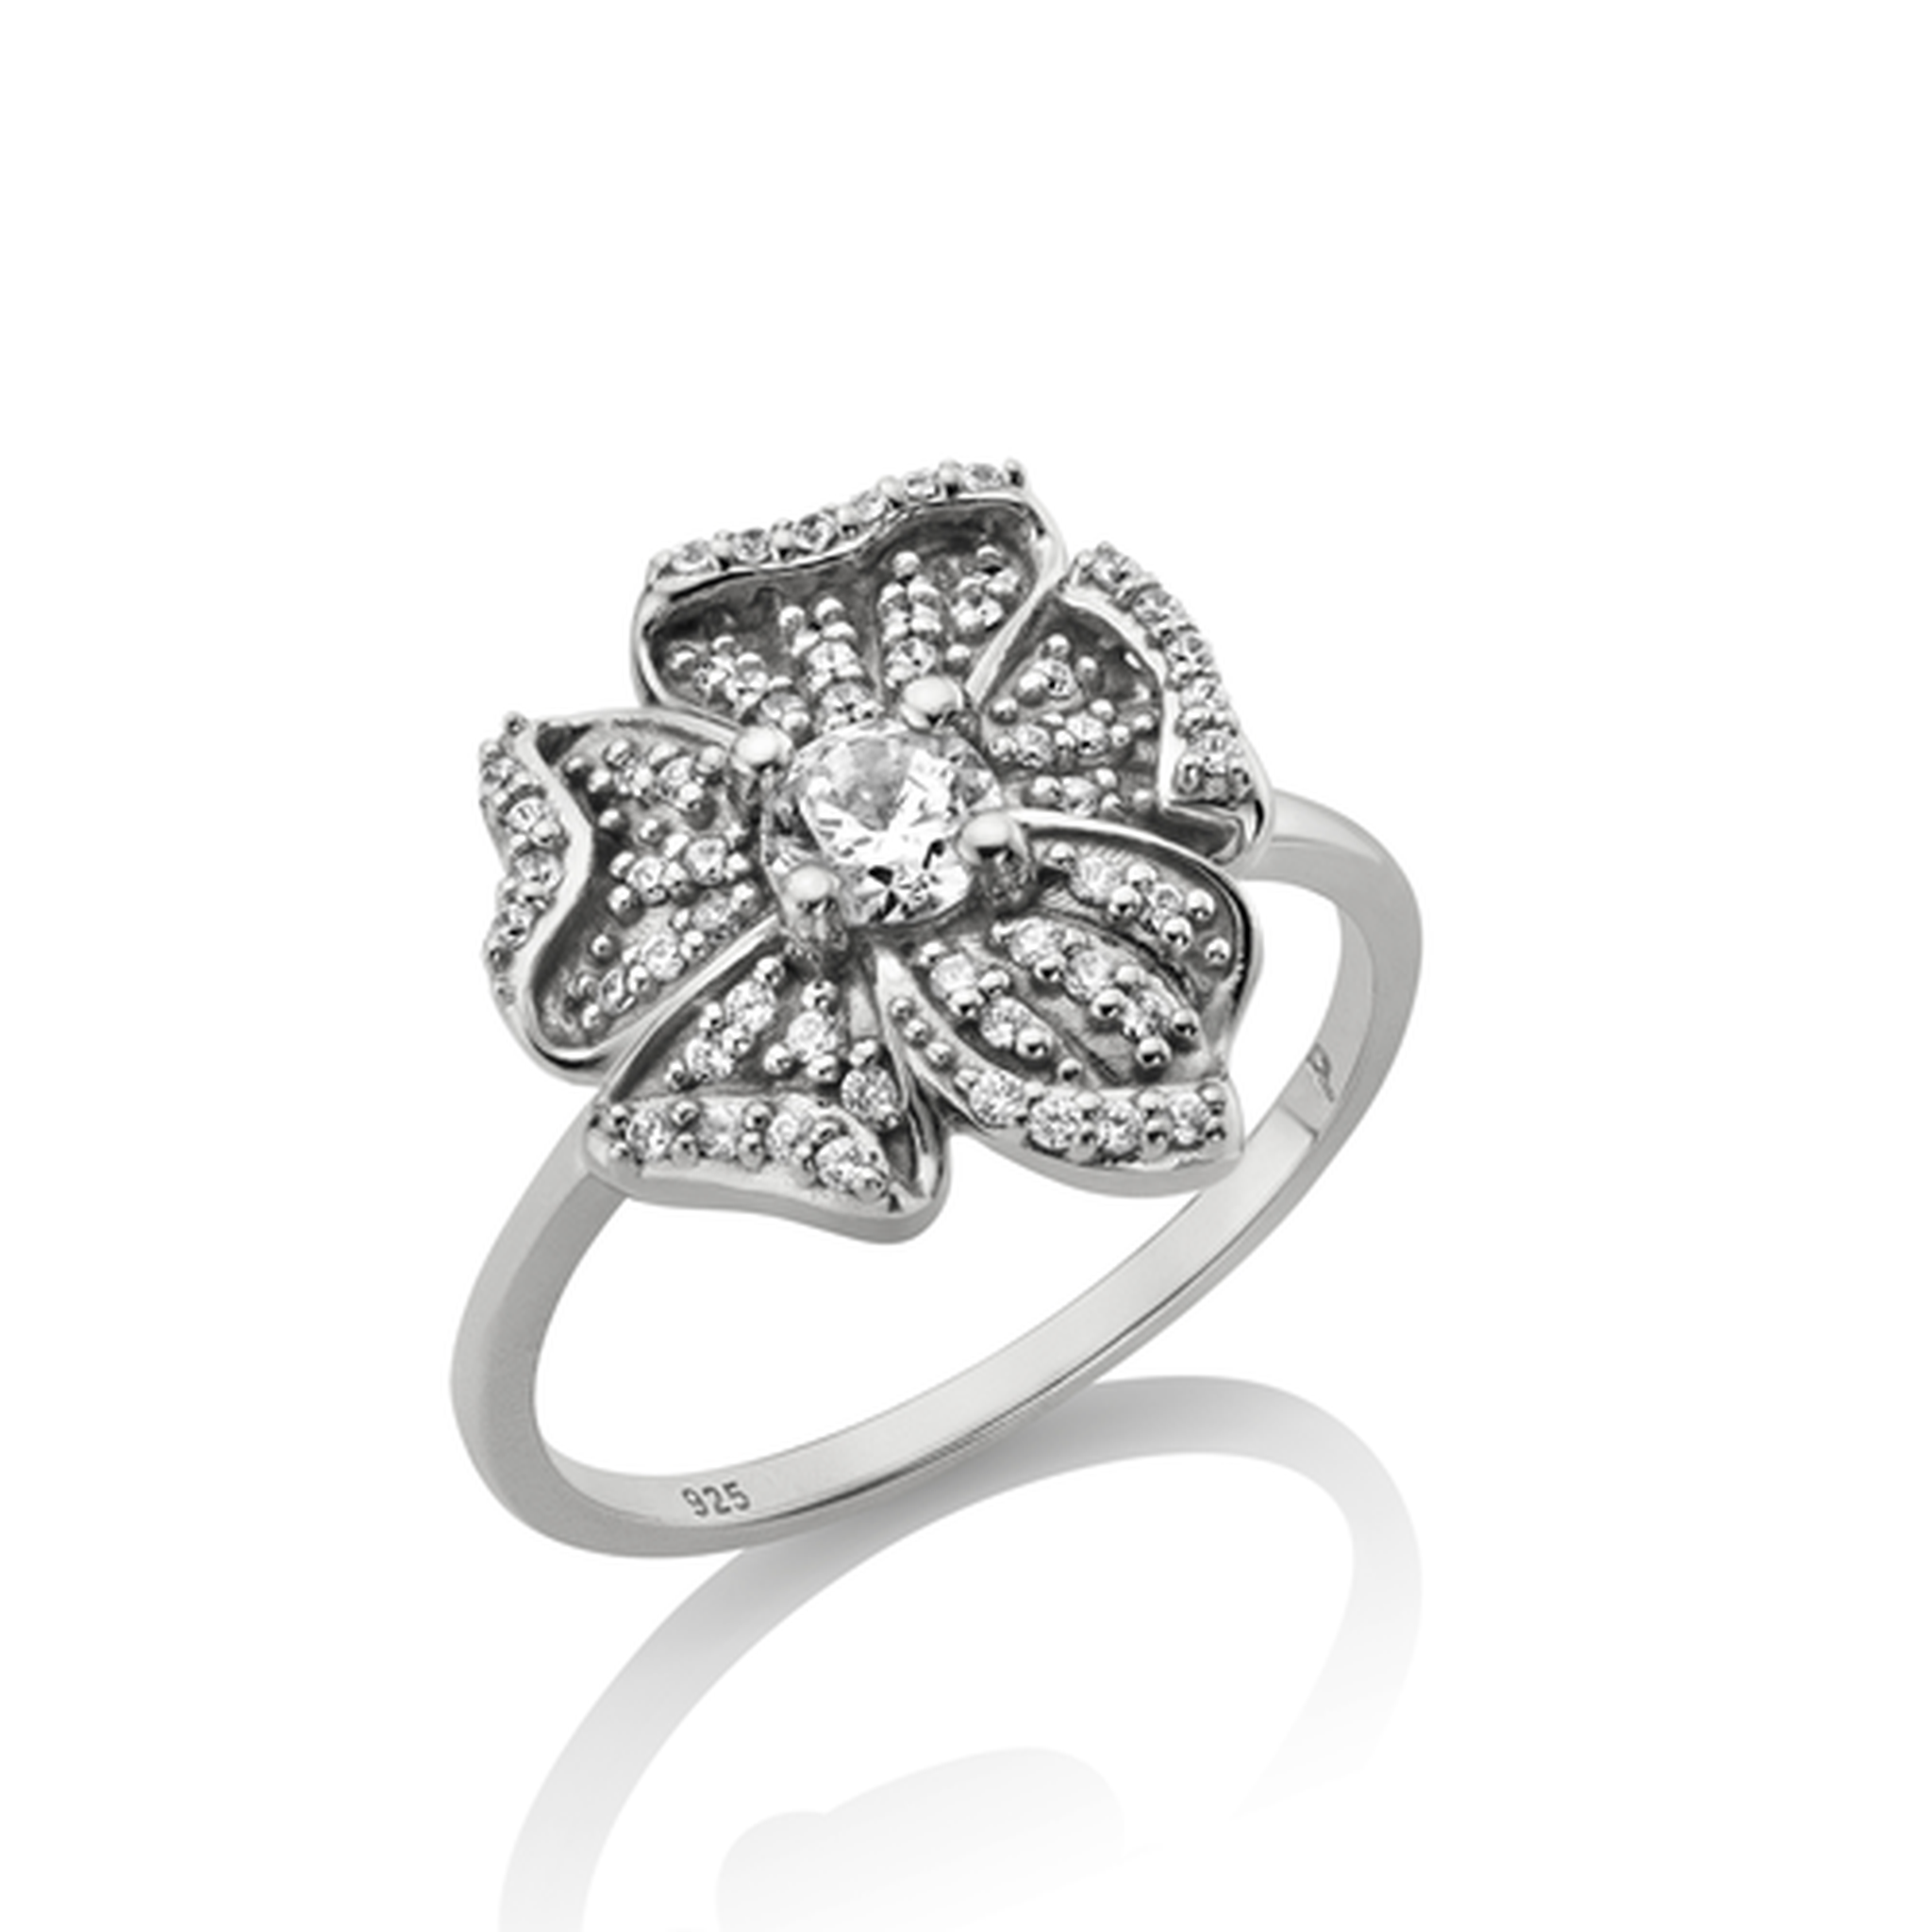 The Silver In Bloom Ring